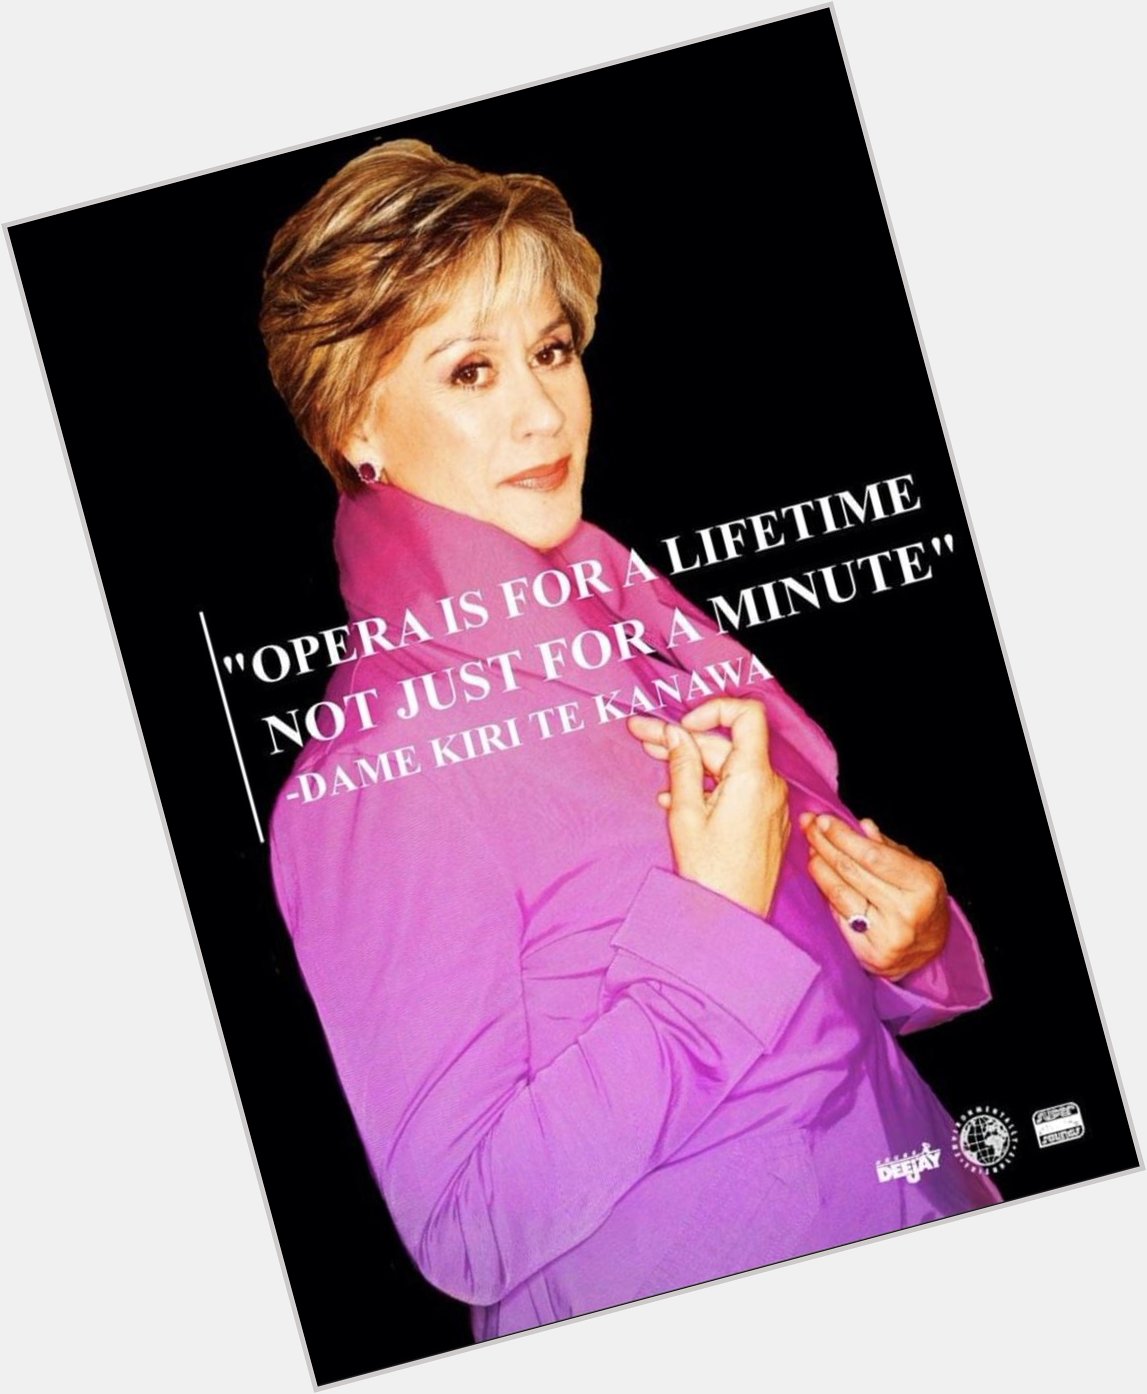 Happy 77th Birthday to the great Kiri Te Kanawa, who was born in Gisborne, New Zealand on this day in 1944. 